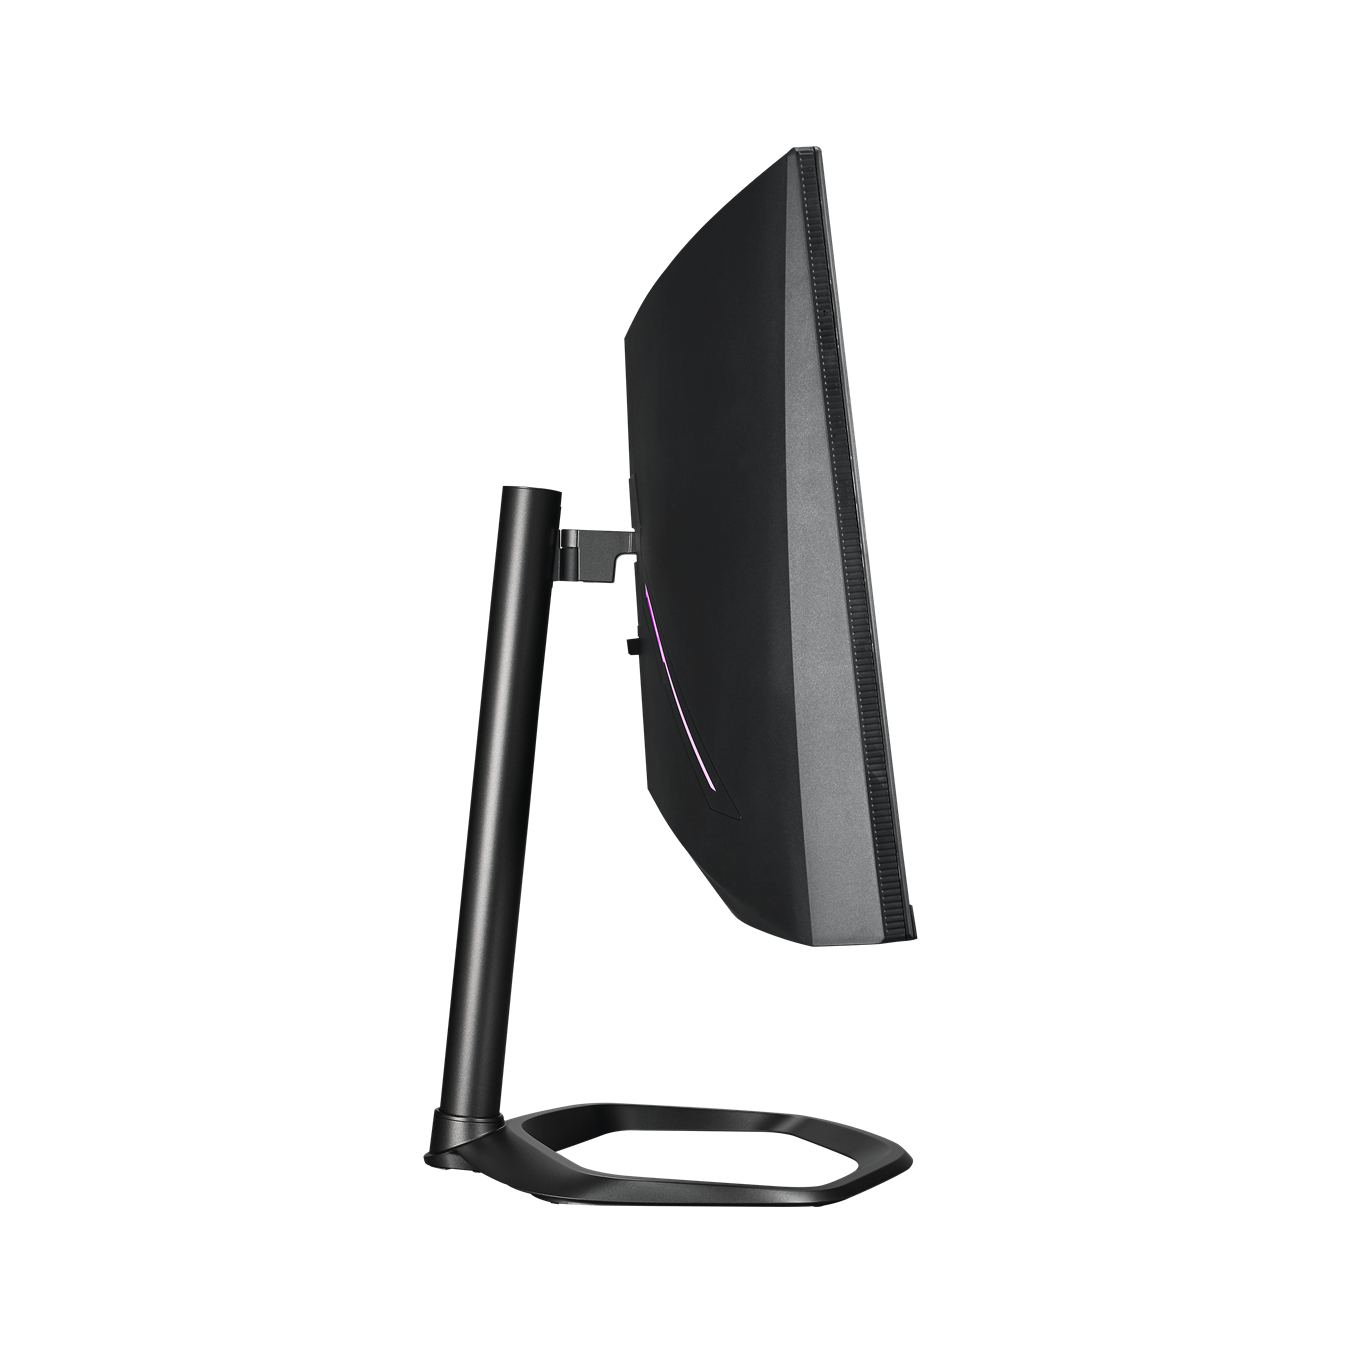 GM34-CW Gaming Monitor - supports up to 100mm of height adjustment and 15 degrees tilt.